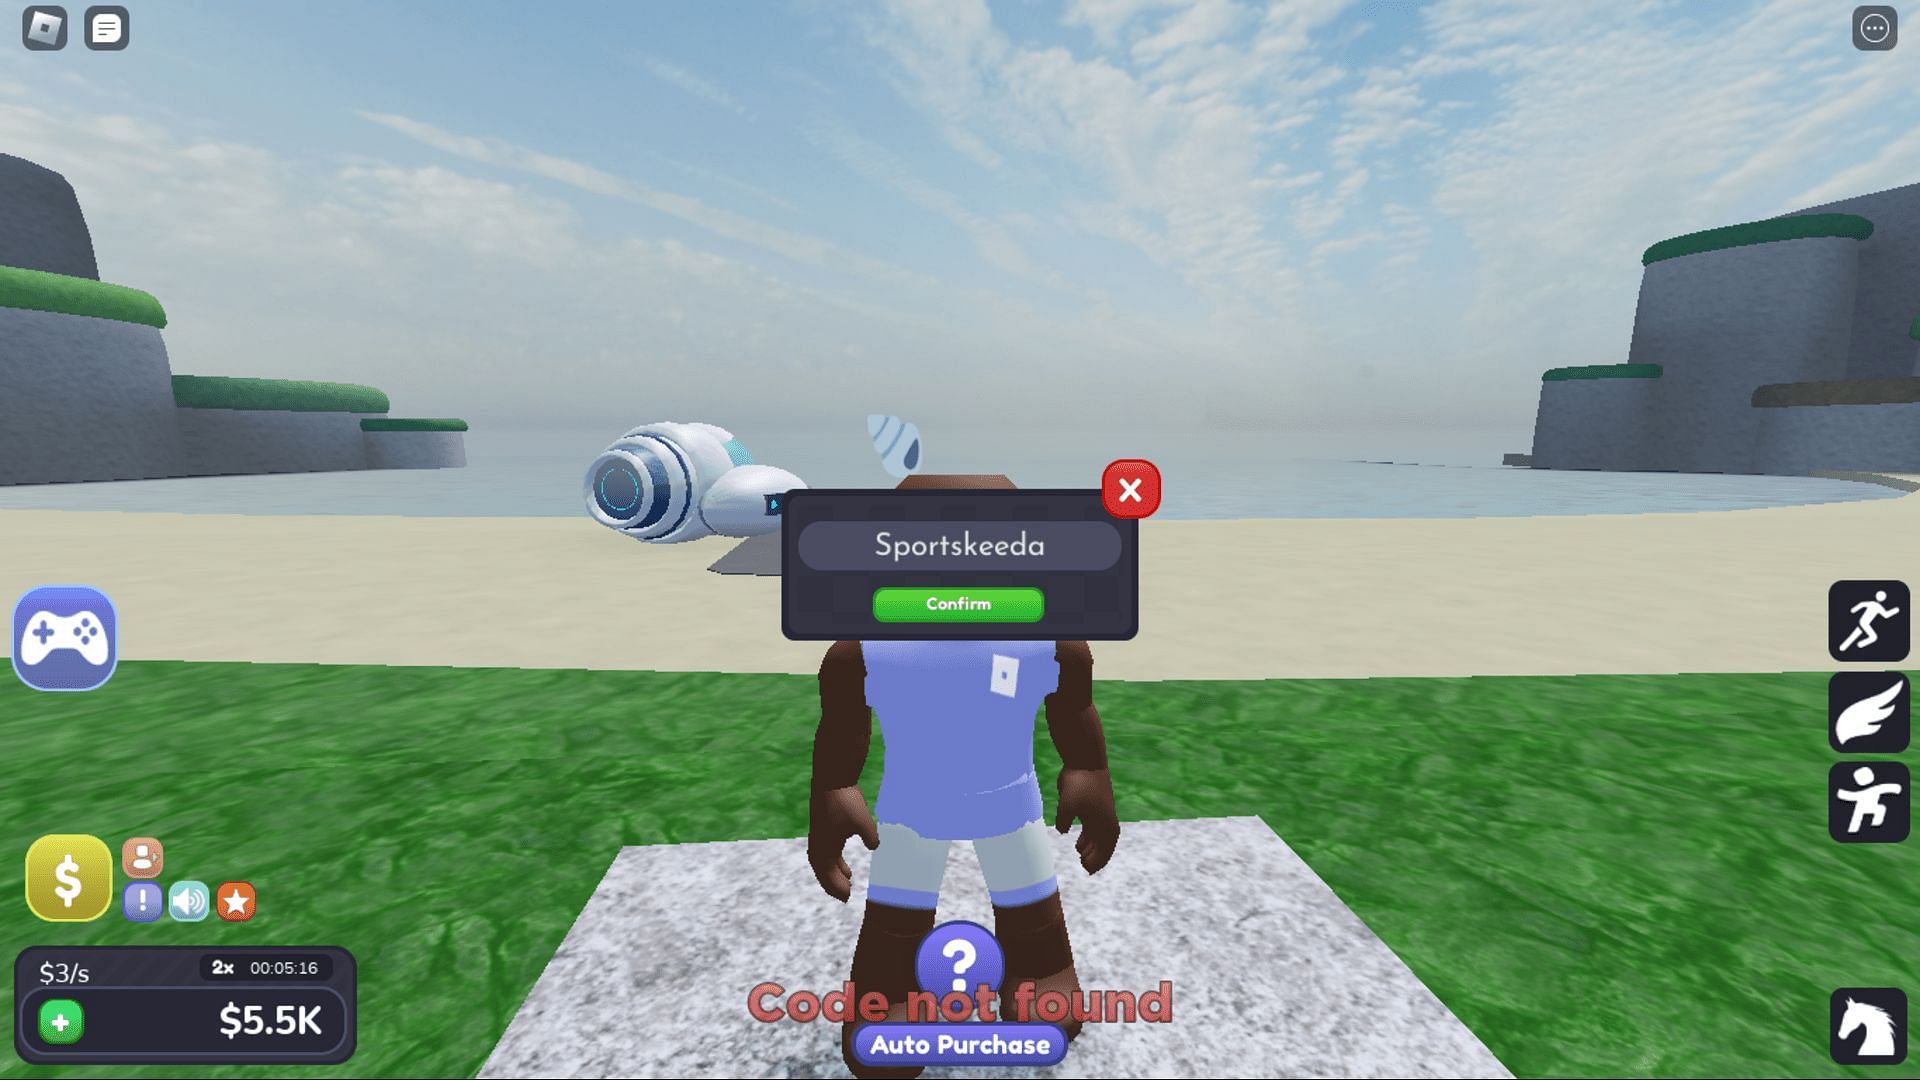 Troubleshoot codes in Princess Castle Tycoon with ease (Image via Roblox)